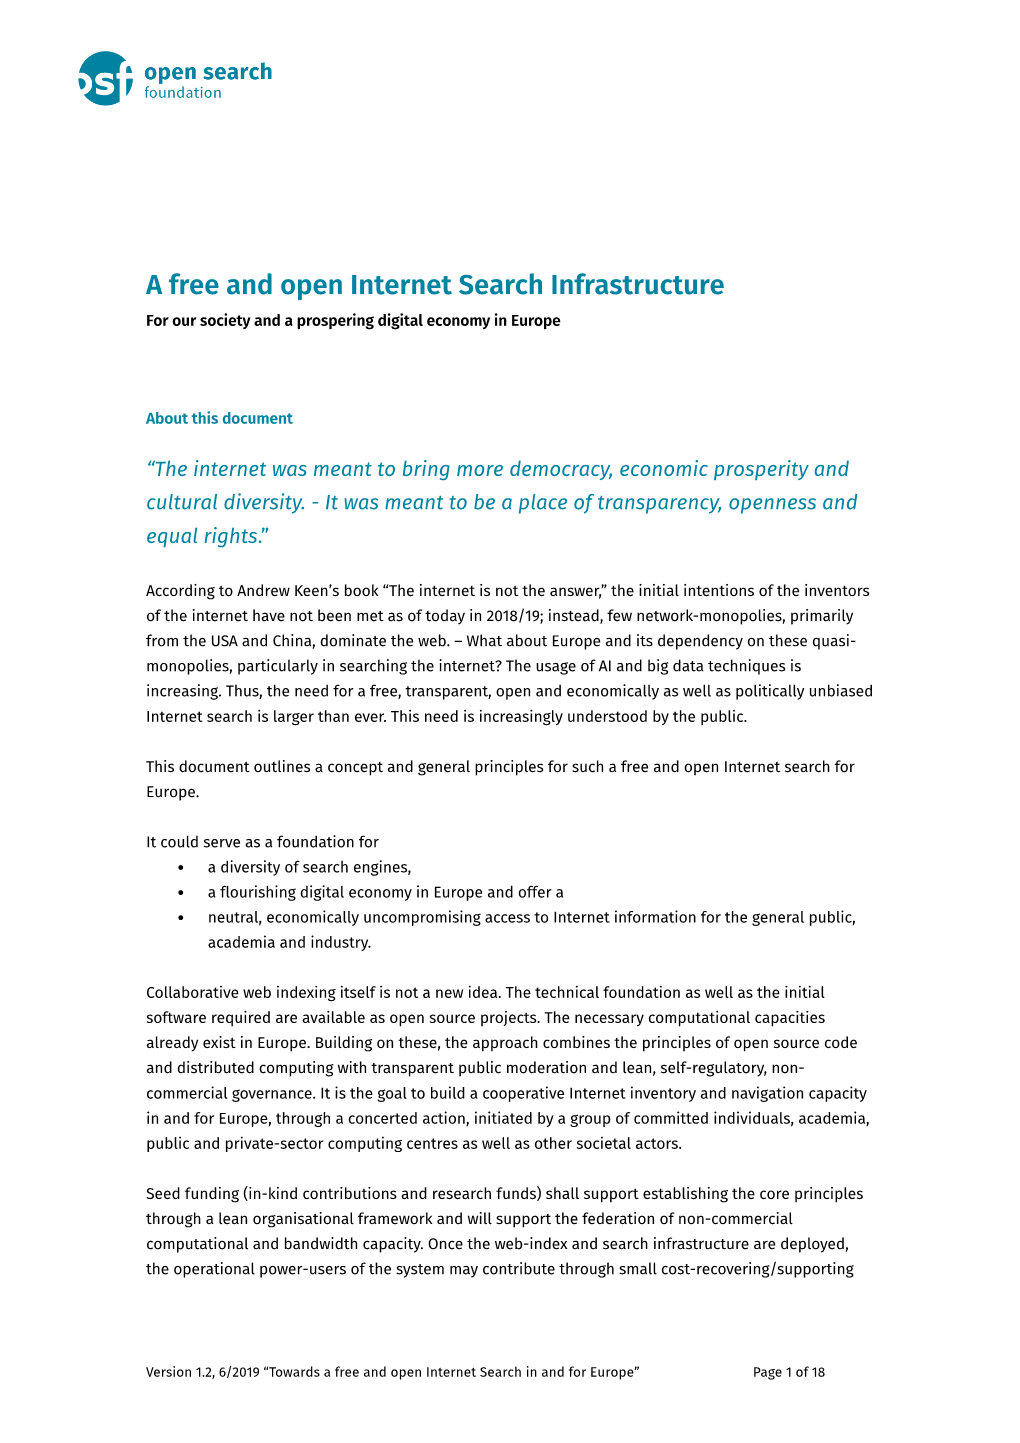 A Free and Open Internet Search Infrastructure for Our Society and a Prospering Digital Economy in Europe